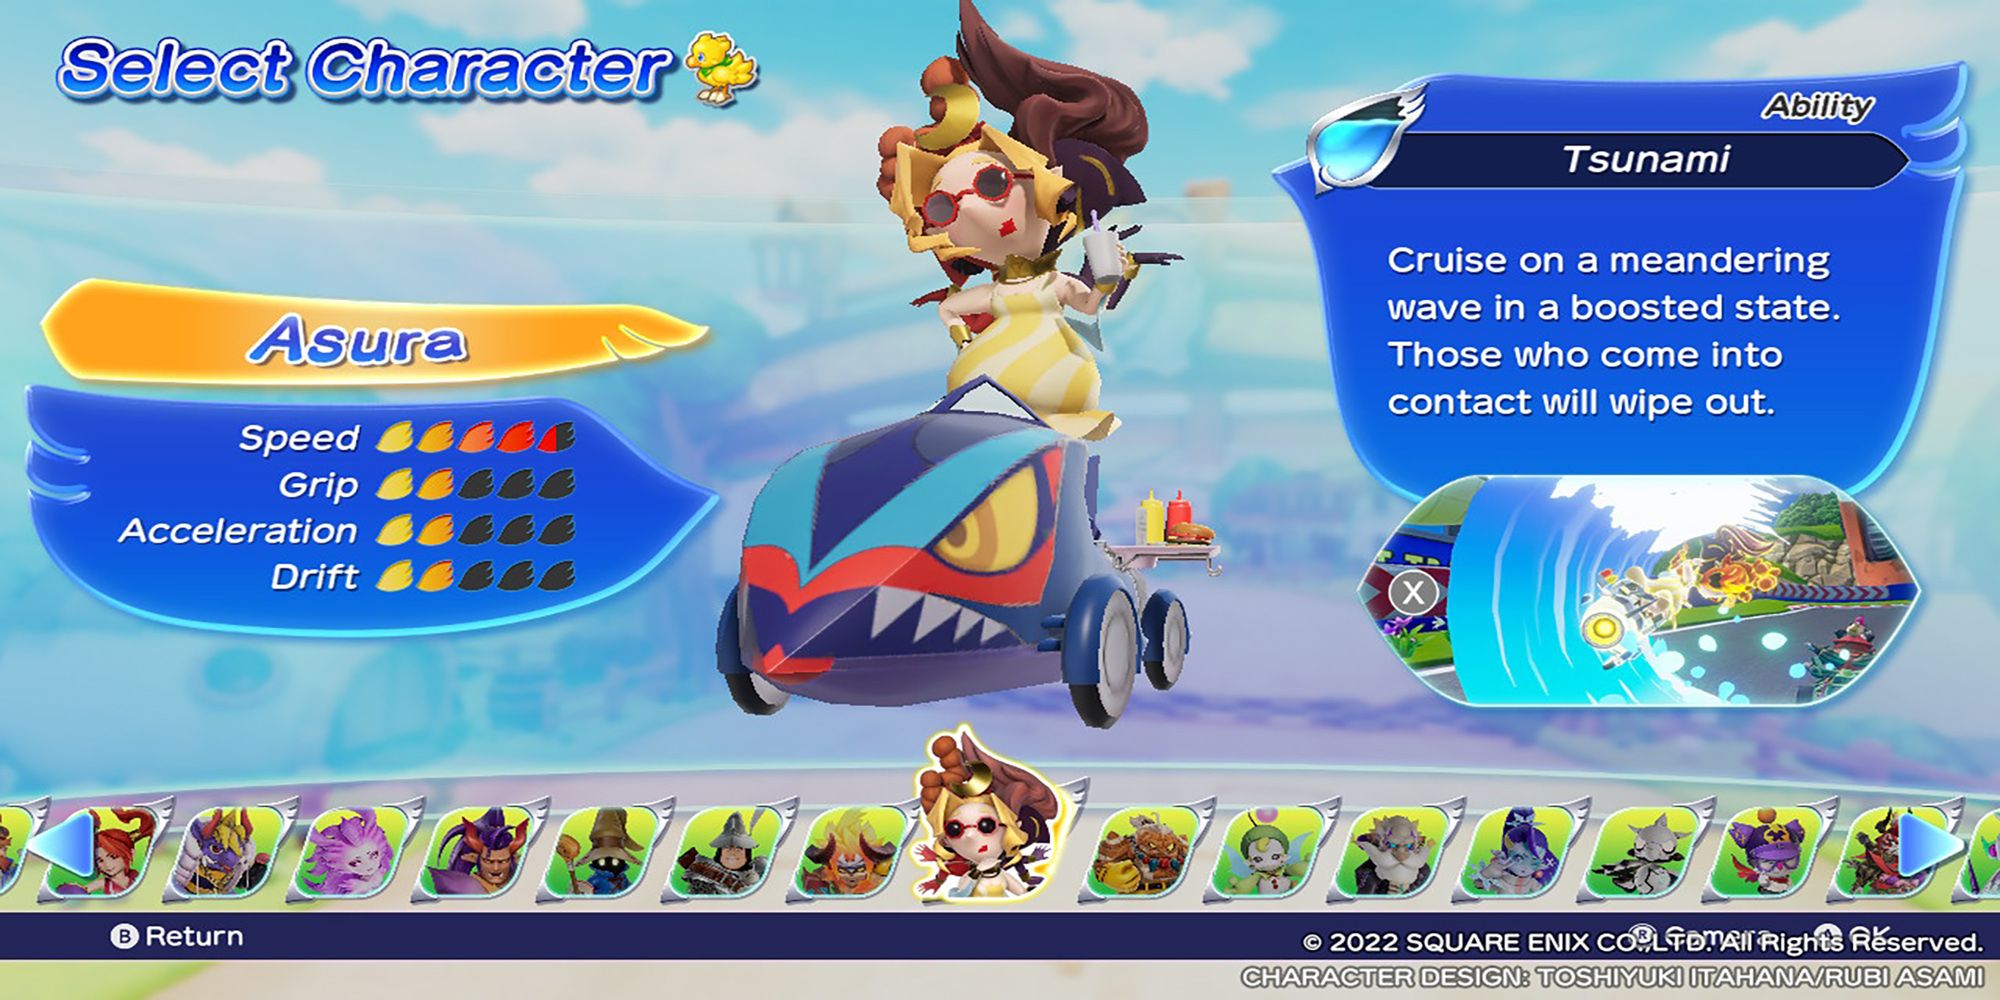 Asura's character model, along with her stats and abilities, in the Select Character menu. Chocobo GP.